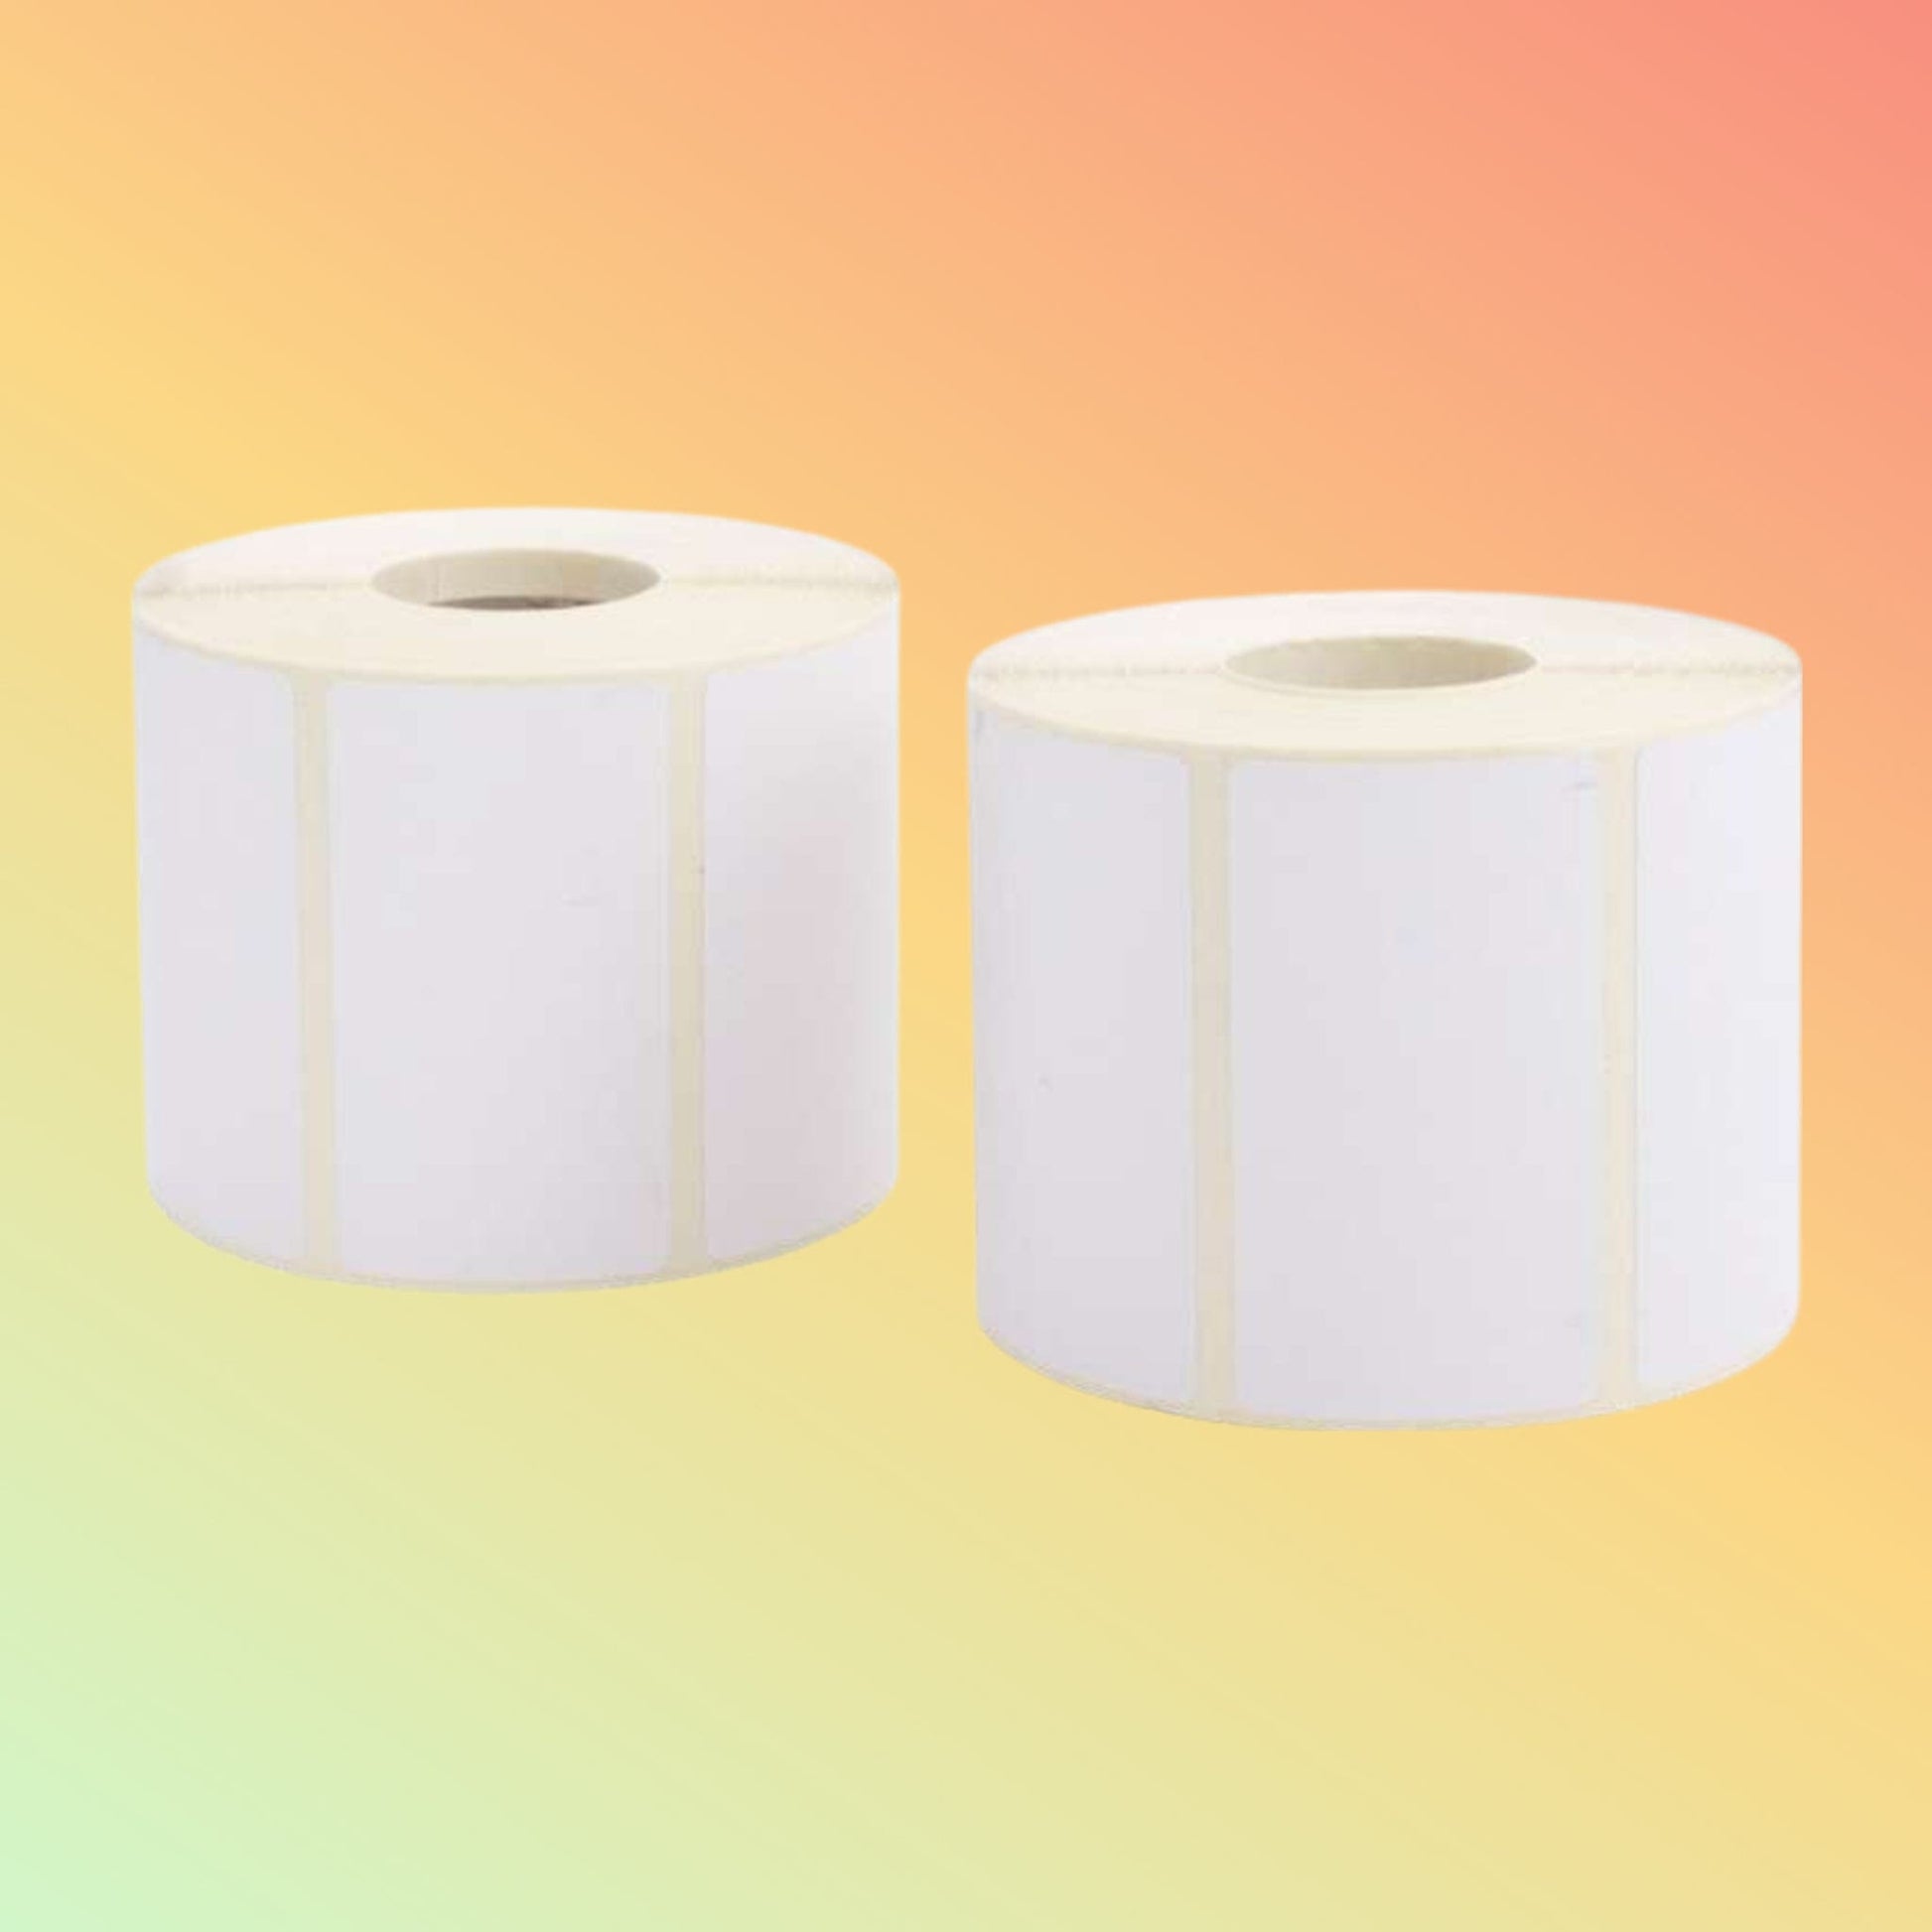 Labels & Labels - 3inch x 2inch 50Rolls/Box - Neotech